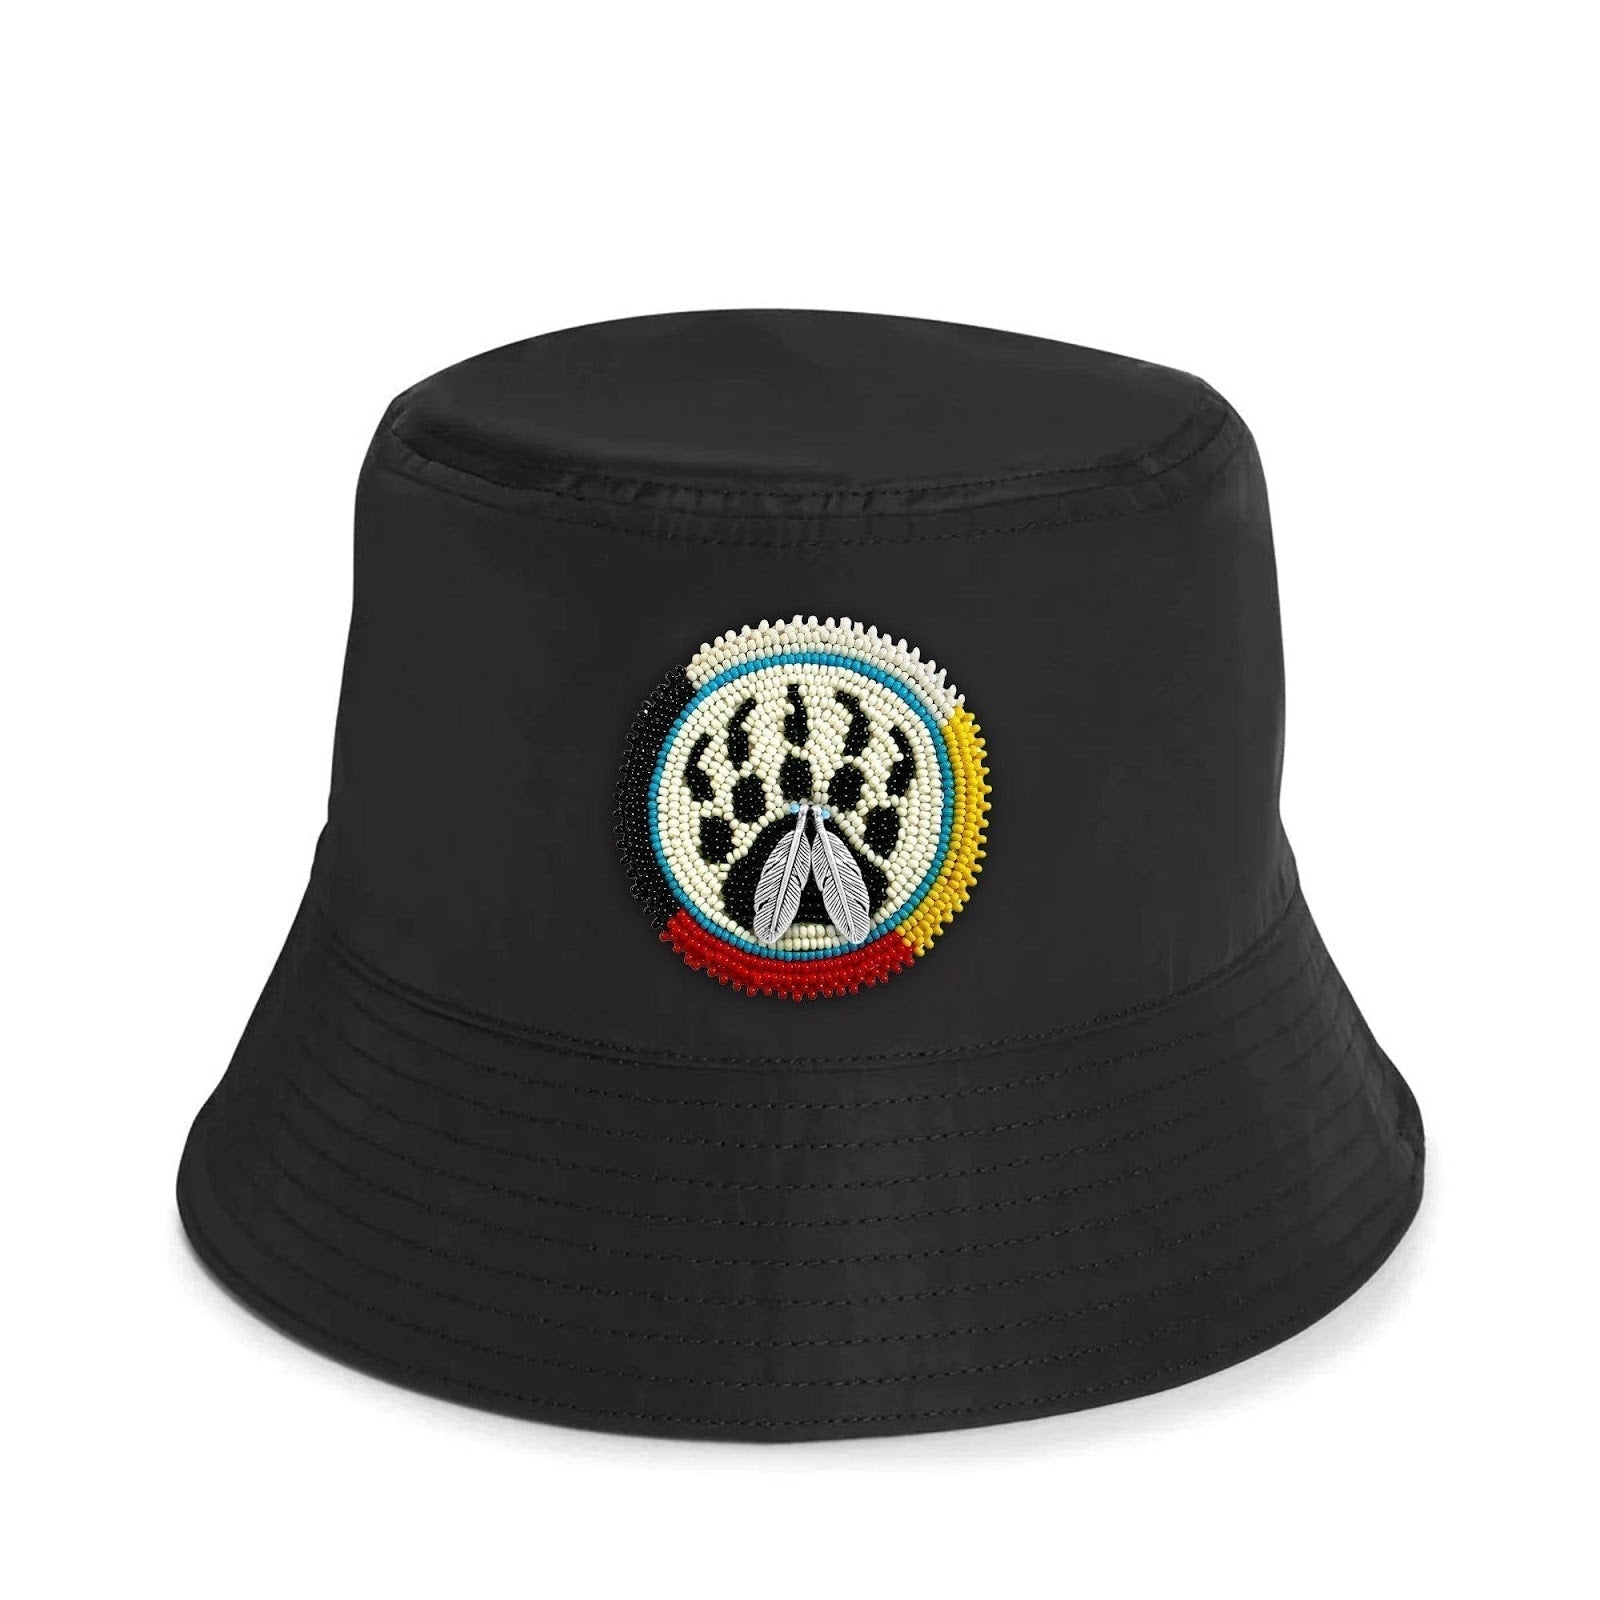 SALE 50% OFF - Bear Paw Beaded Unisex Cotton Bucket Hat with Native American